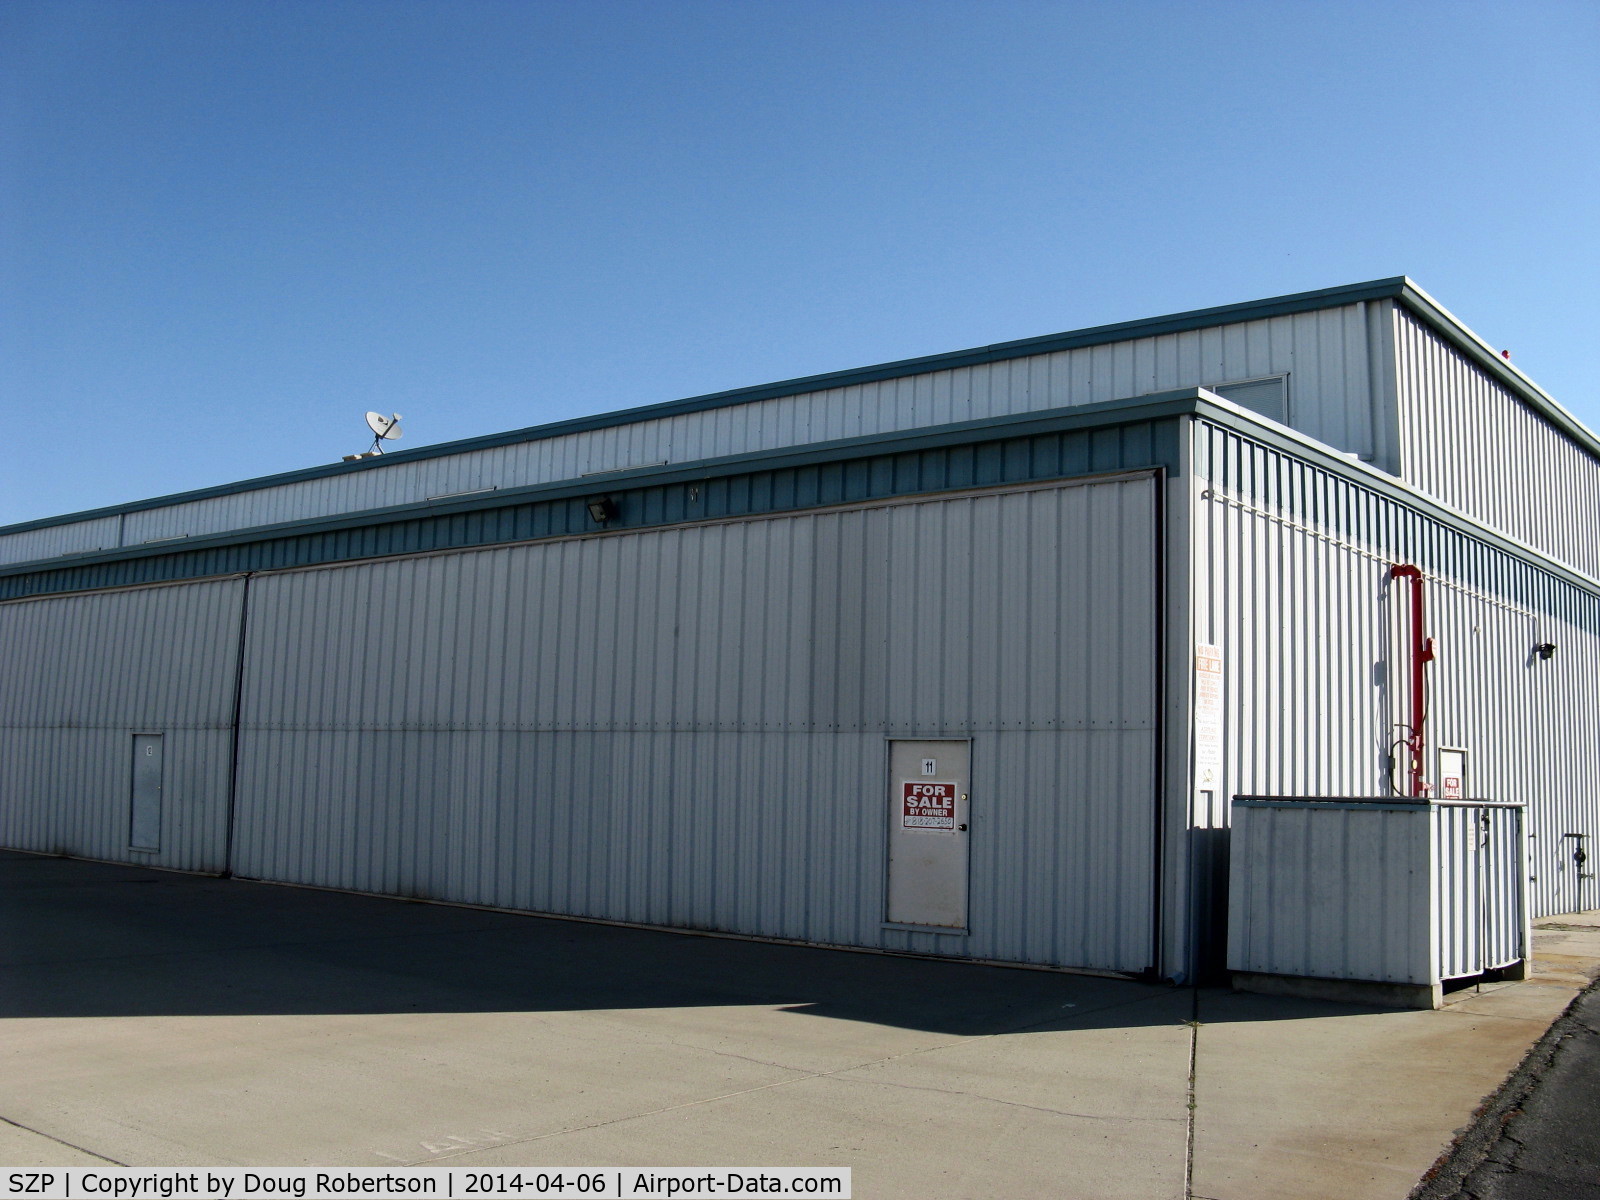 Santa Paula Airport (SZP) - 11 Vicki Cruse taxiway, Hangar FOR SALE, large with living quarters above